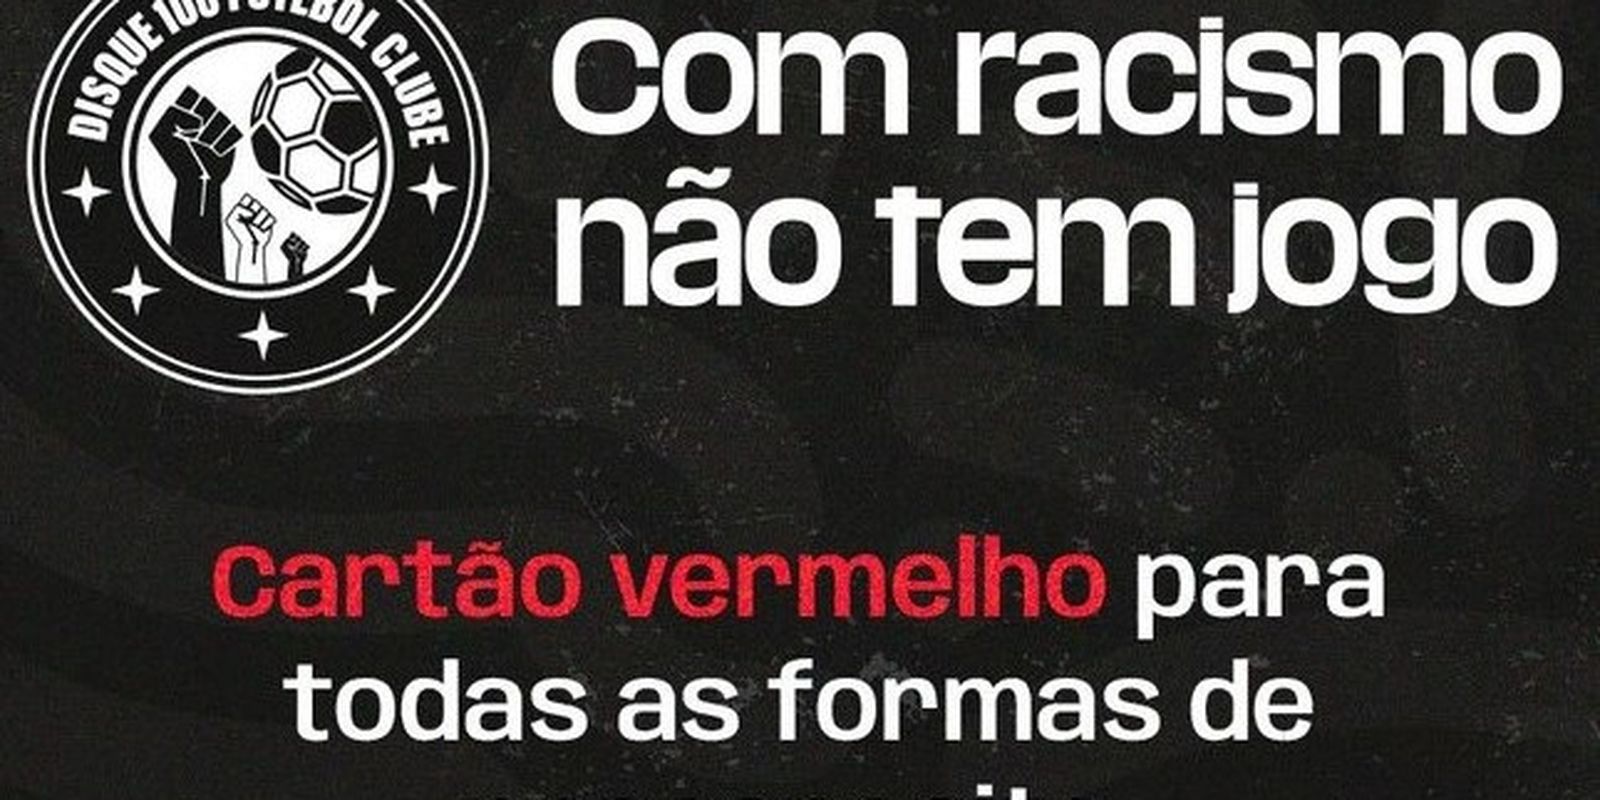 The Brazilian Cup final will be an anti-racism campaign